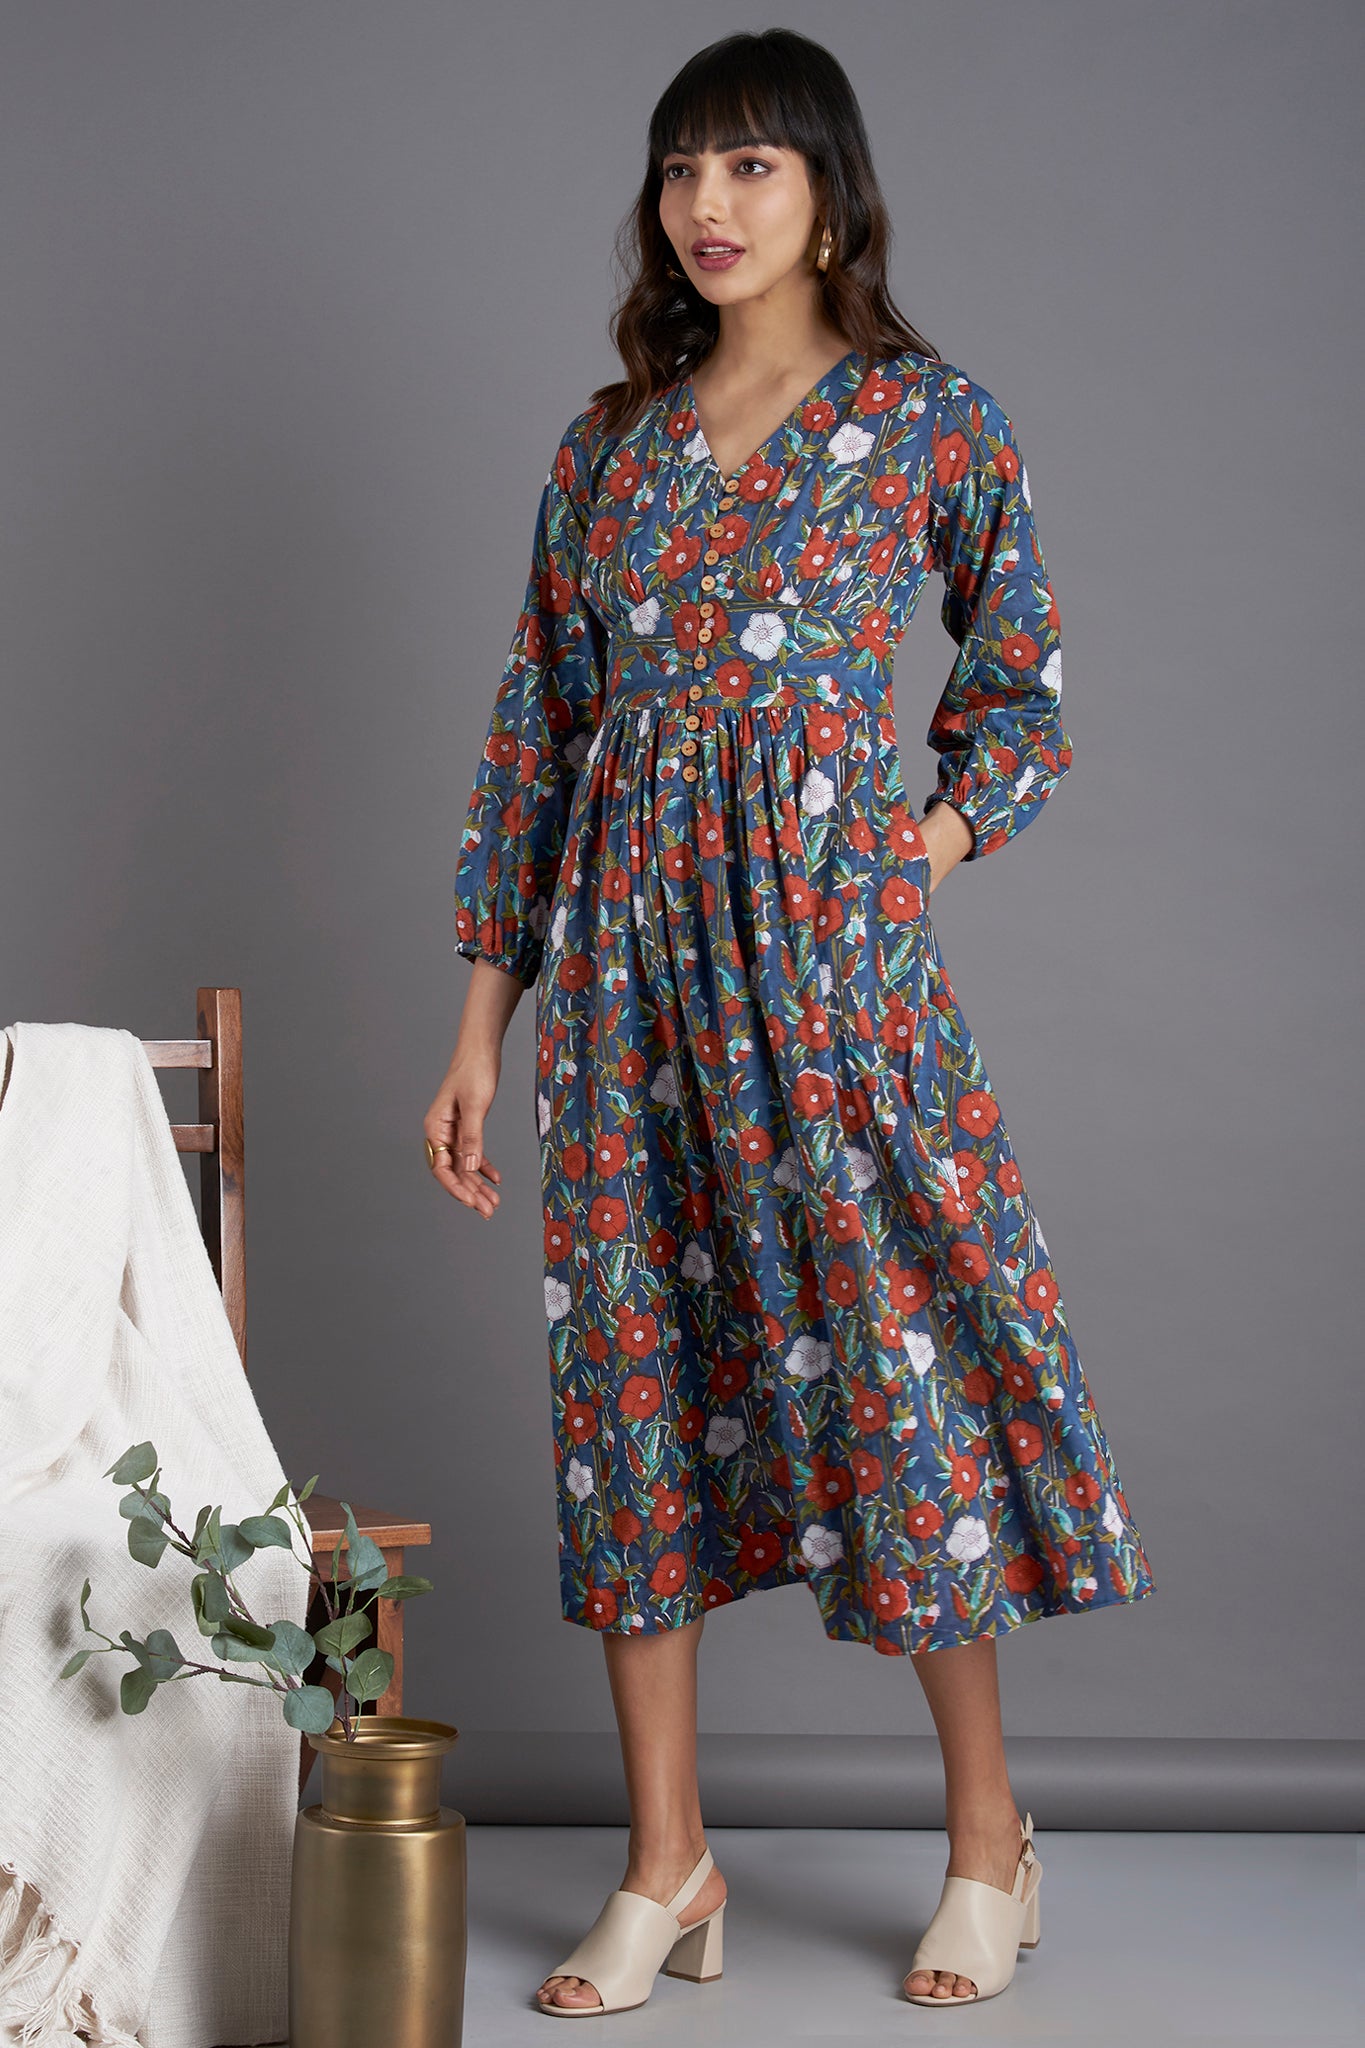 V Neck Indigo orange white floral gather dress with fitted waist and pockets